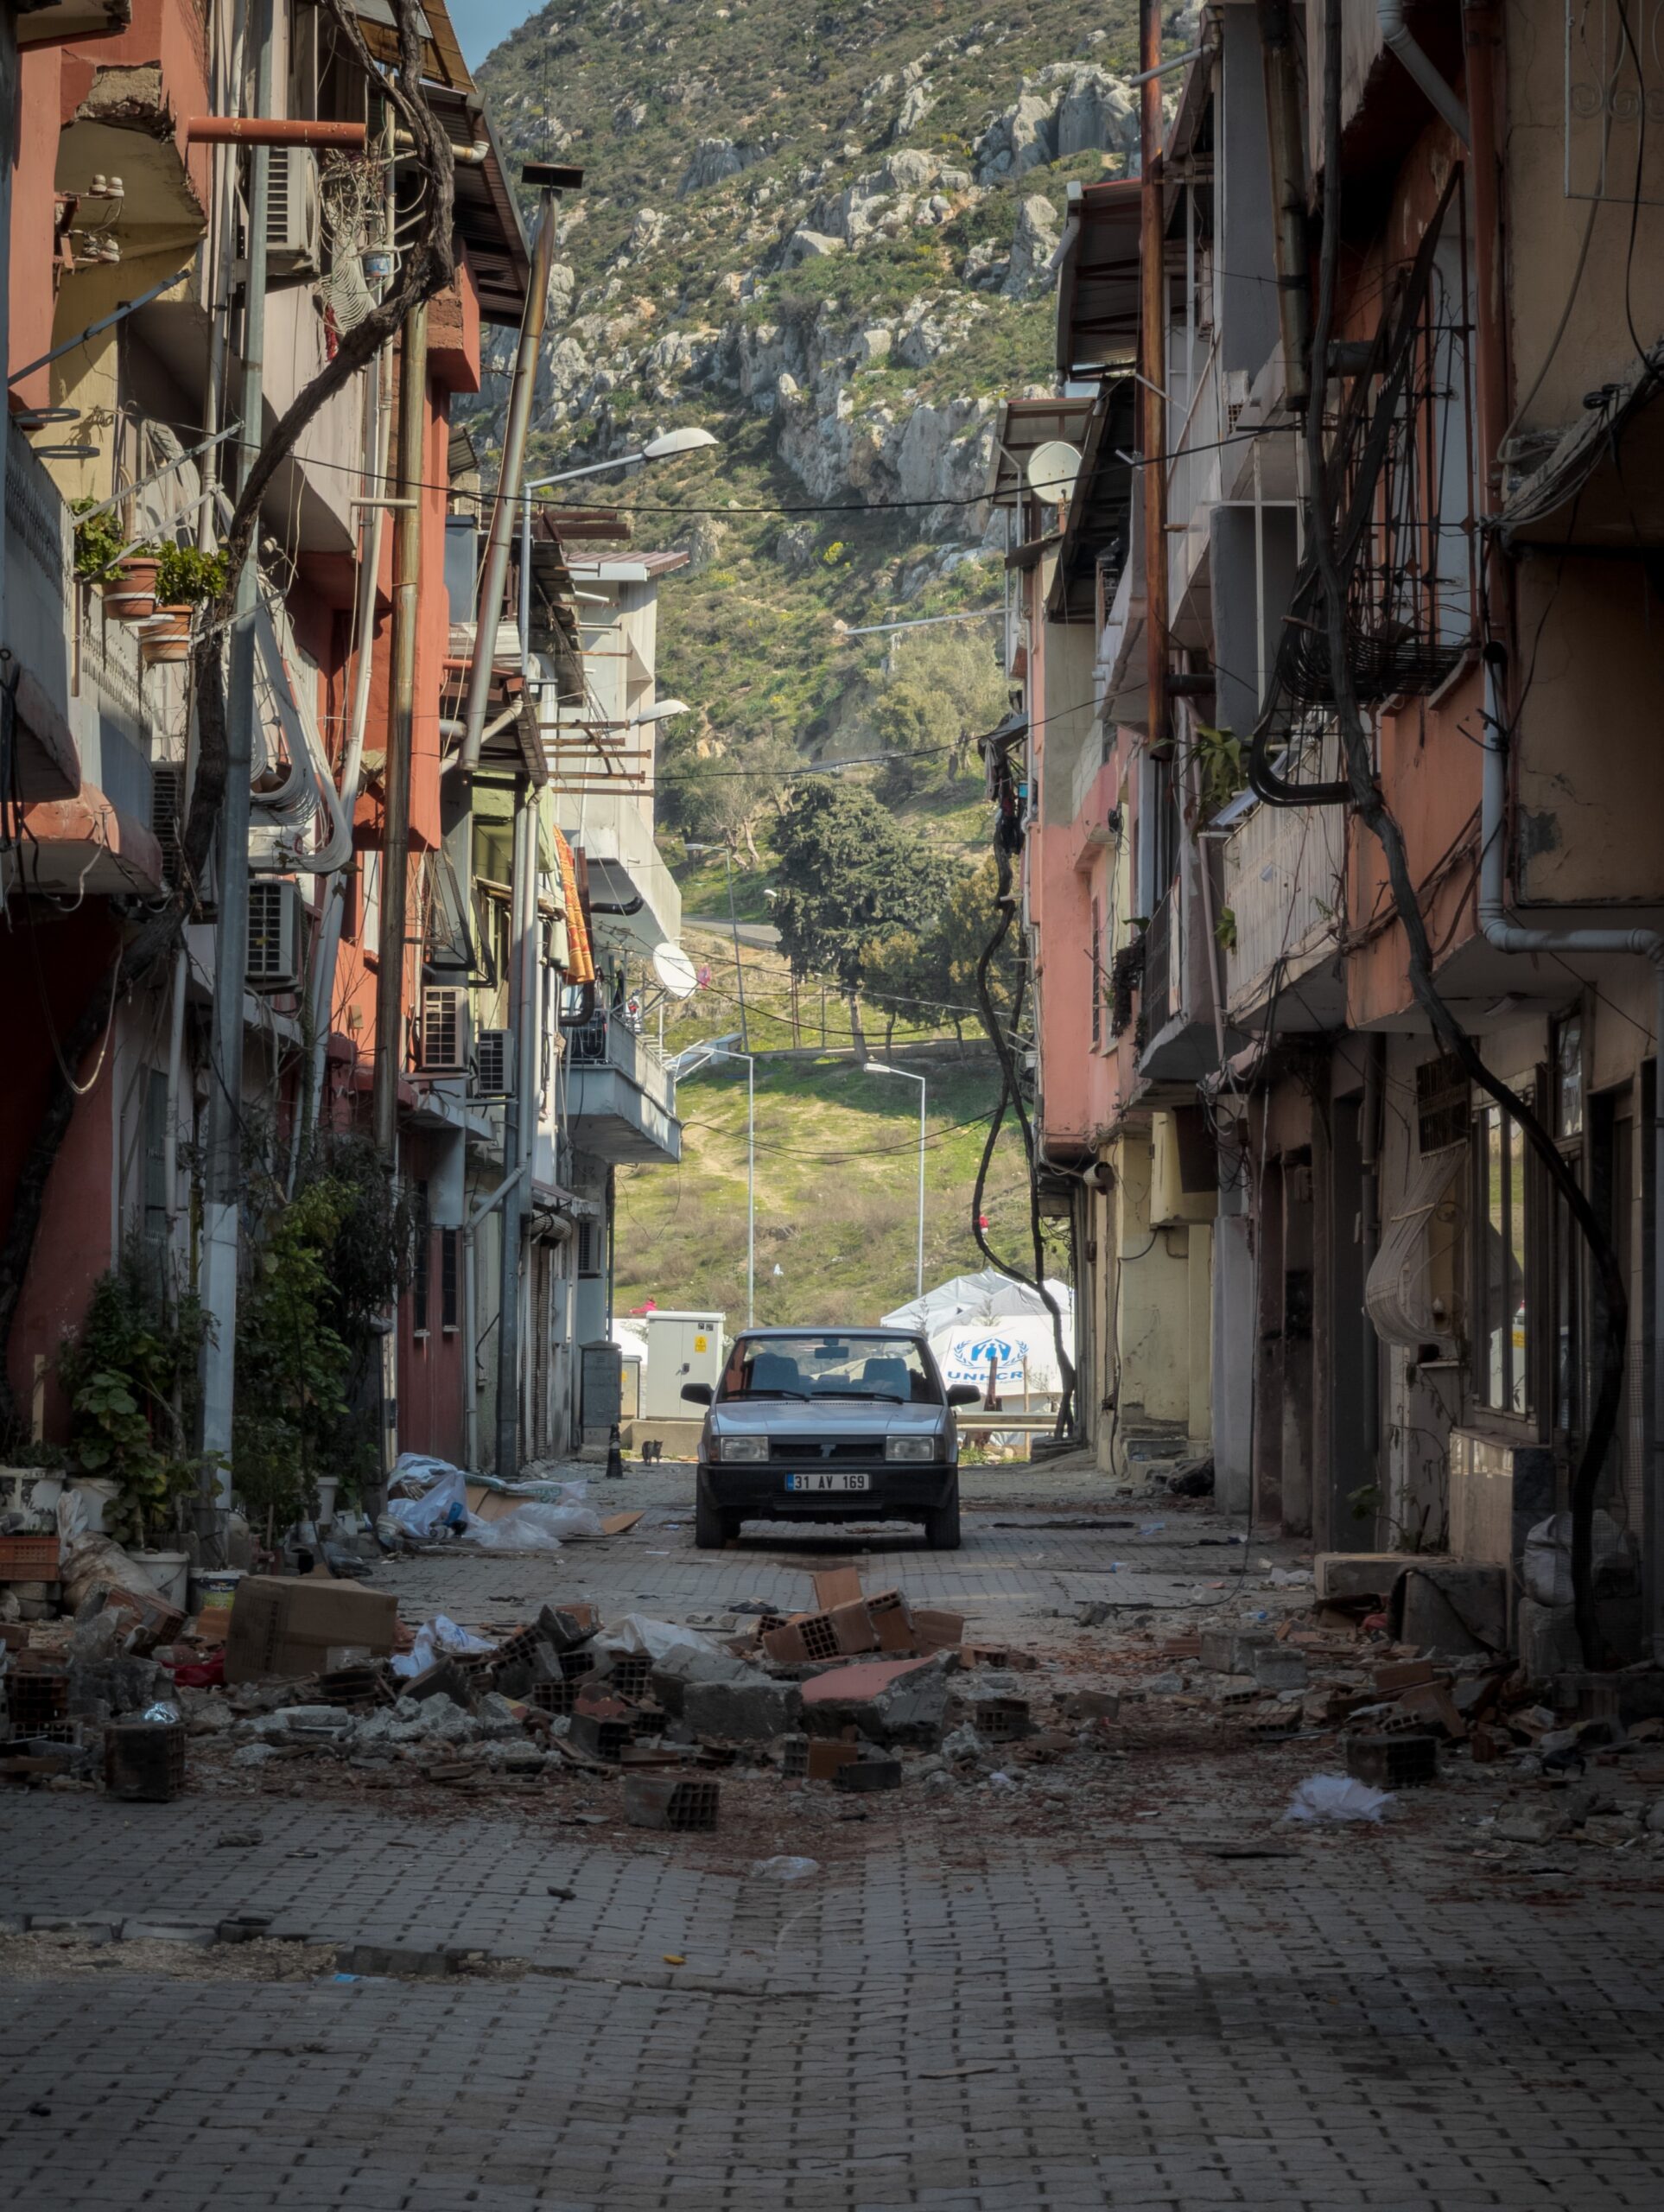 One of the few streets with all standing buildings after the Turkey earthquake